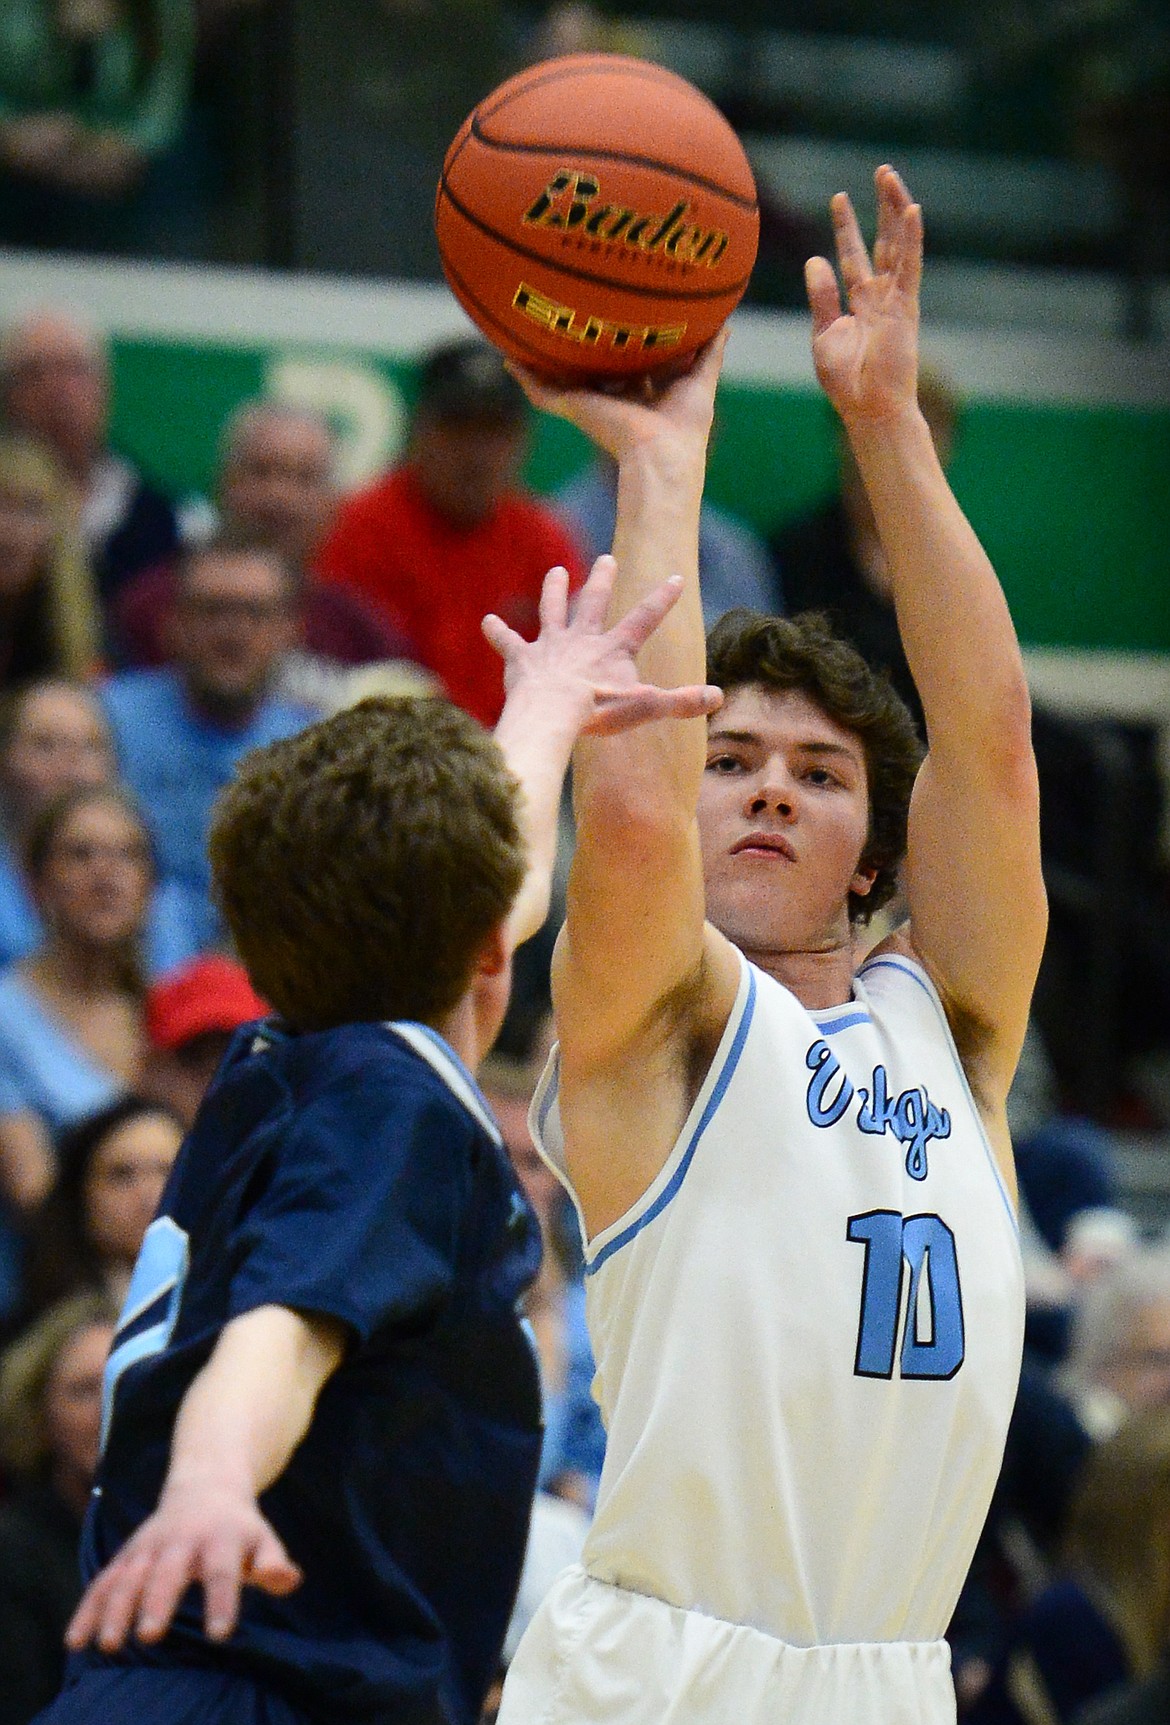 Bigfork's Randy Stultz (10) shoots against Loyola Sacred Heart in the State Class B boys' basketball championship at the Belgrade Special Events Center in Belgrade on Friday. (Casey Kreider/Daily Inter Lake)